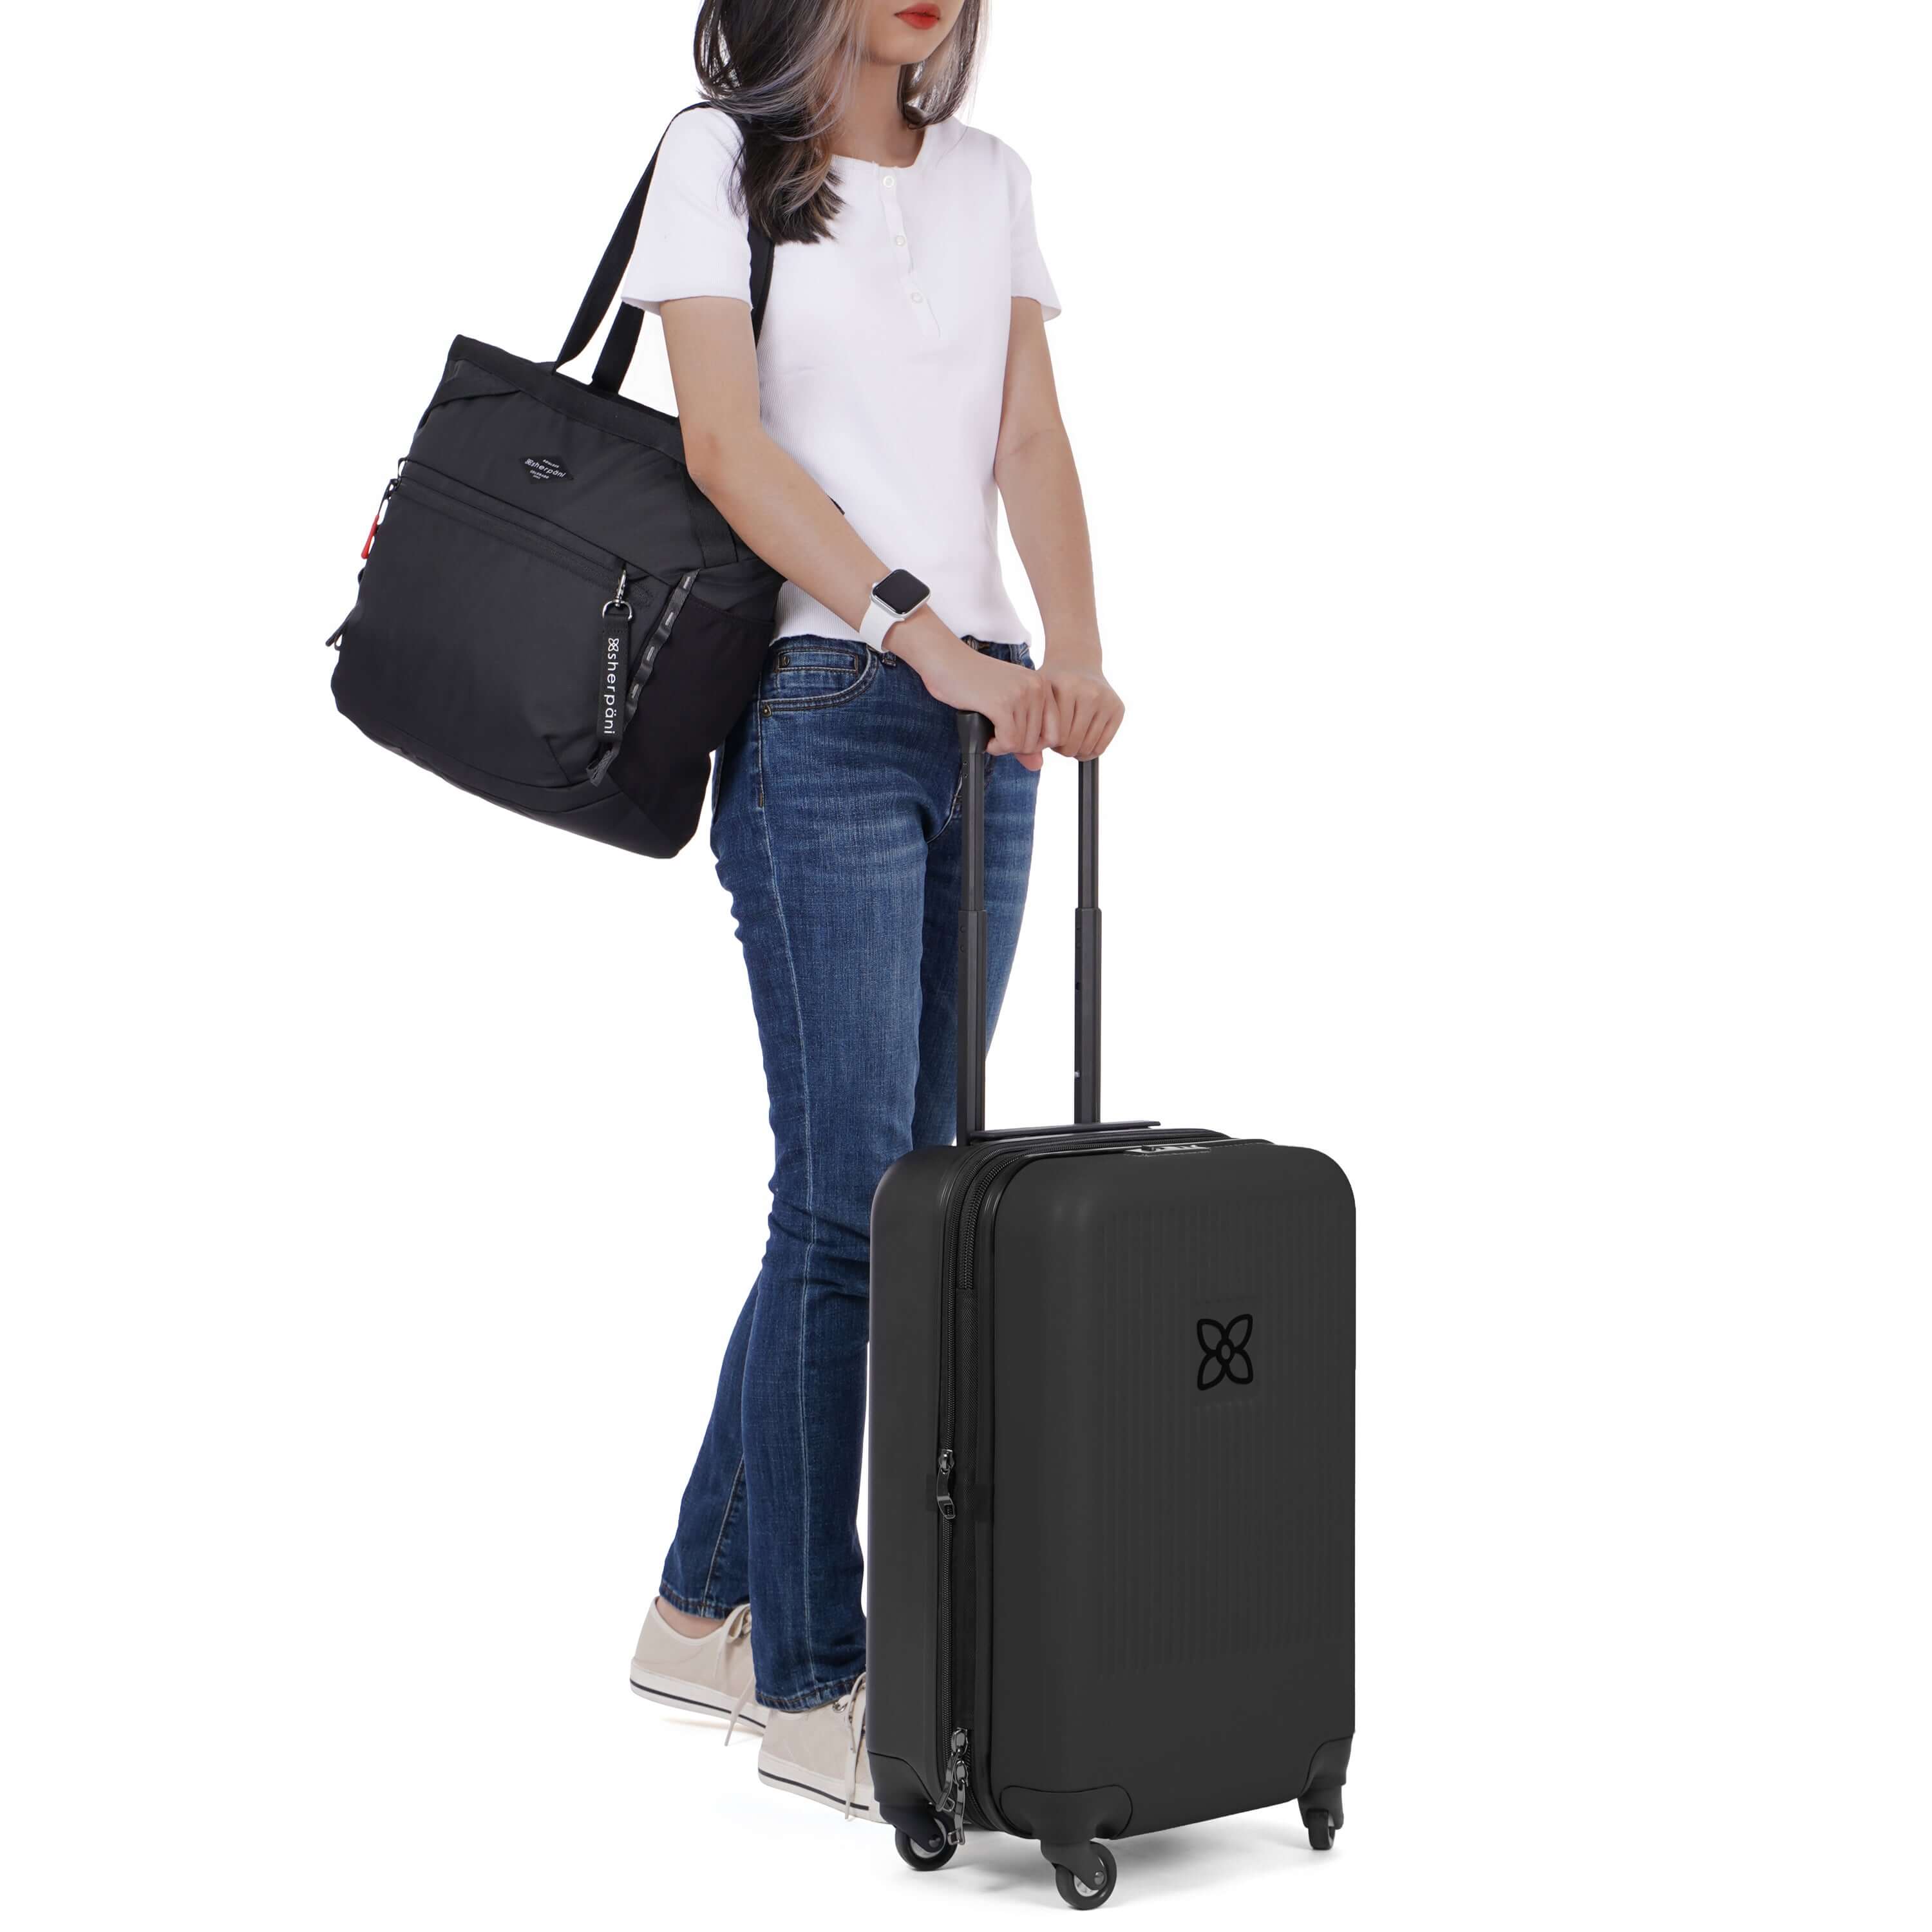 A model stands with both hands on the retractable luggage handle of Sherpani suitcase, the Meridian in Black. Over her shoulder is Sherpani travel bag with trolley sleeve, the Stride in Raven. 